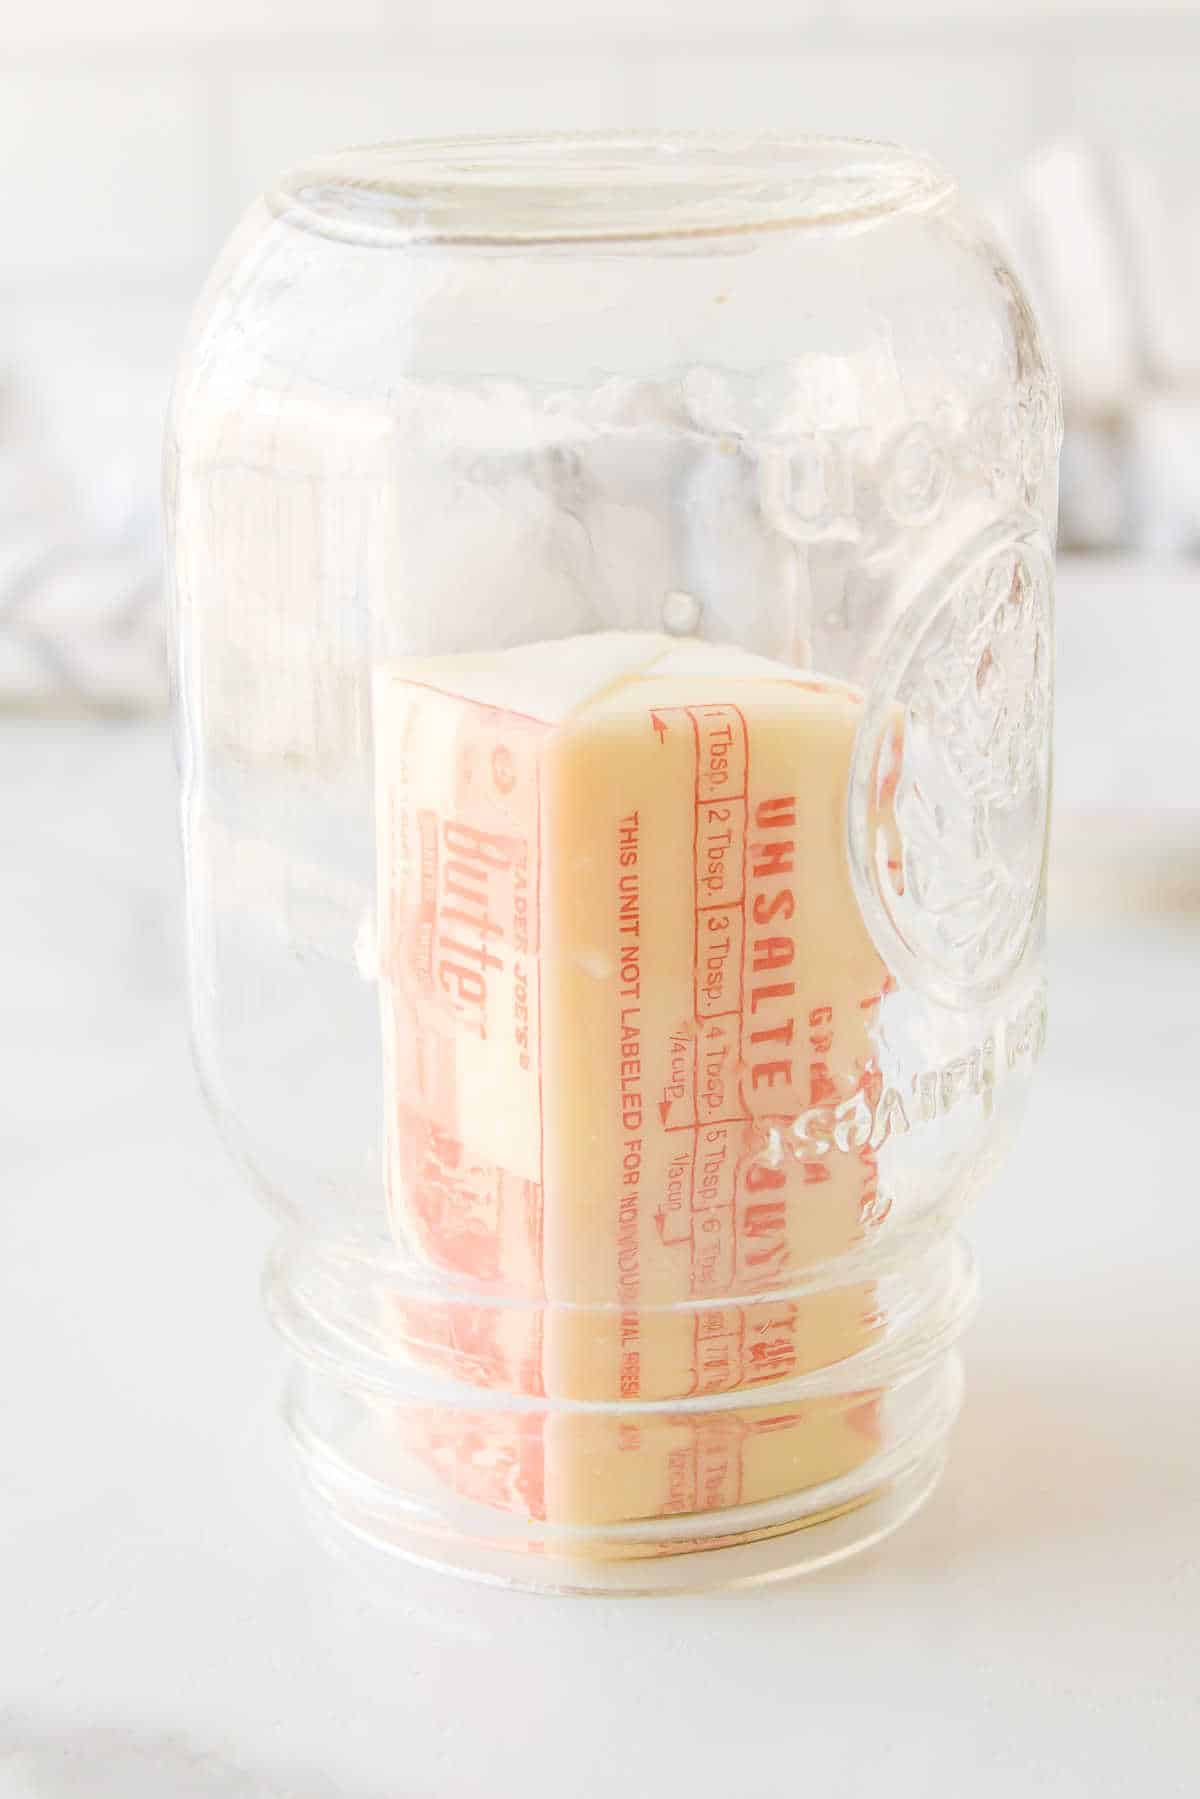 A clear glass jar sitting over a stick of butter.